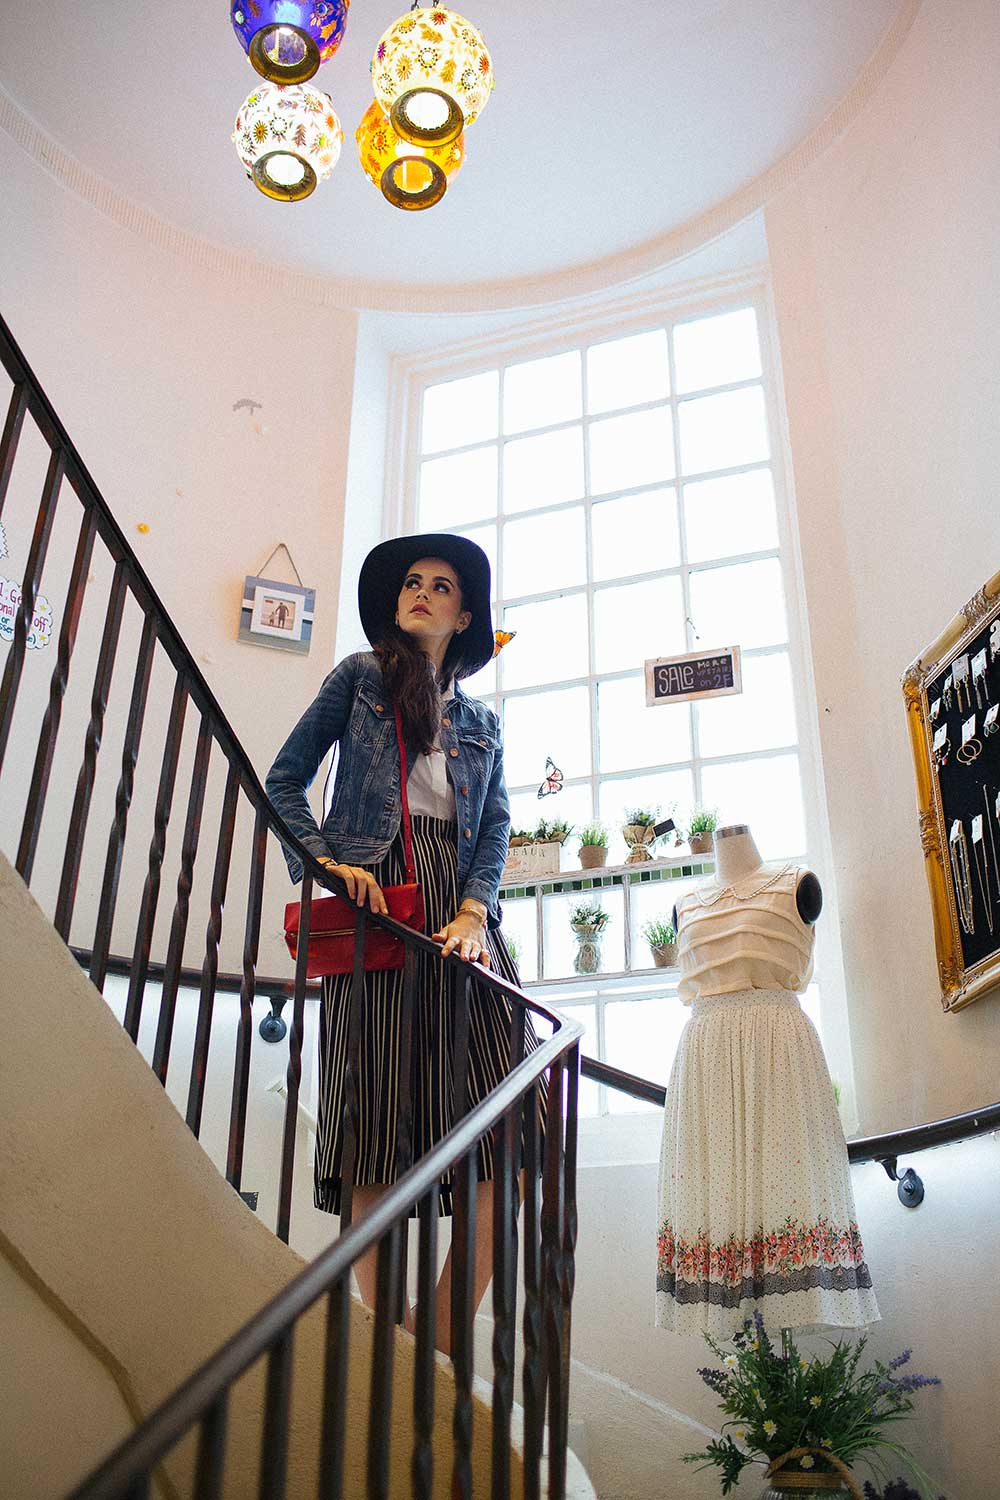 Woman in floppy hat standing on stairwell